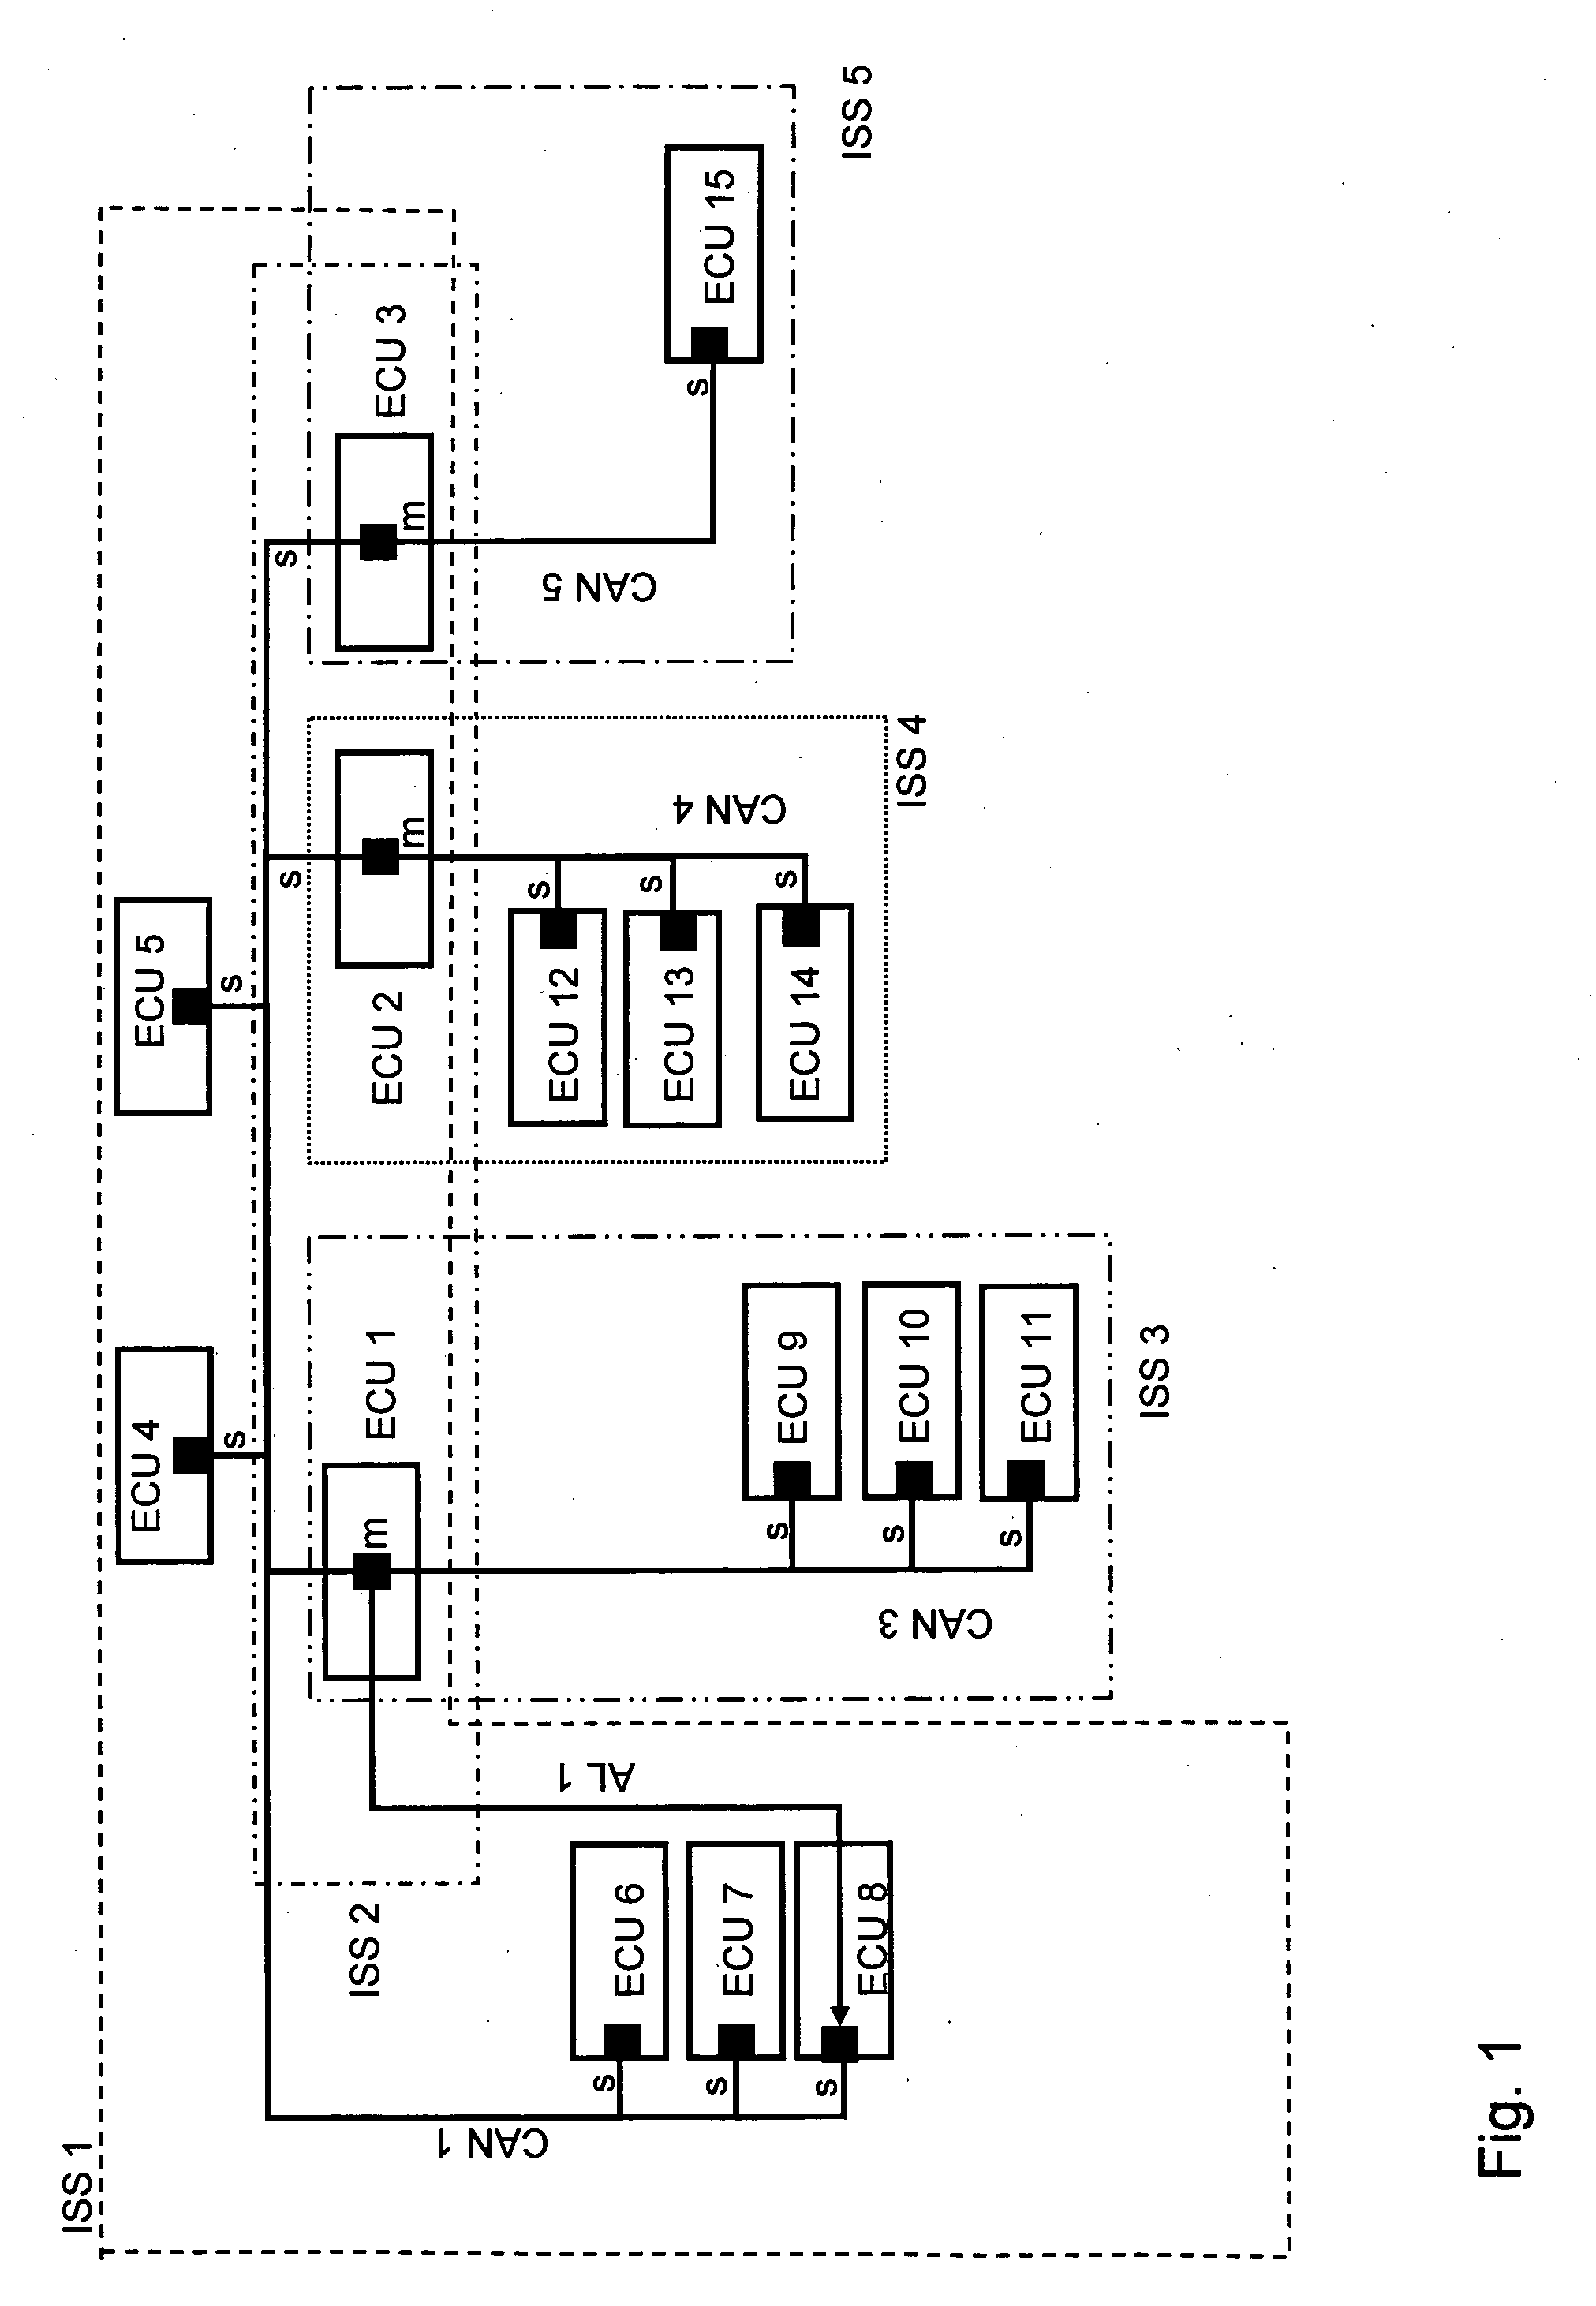 System and method for changing the state of vehicle components